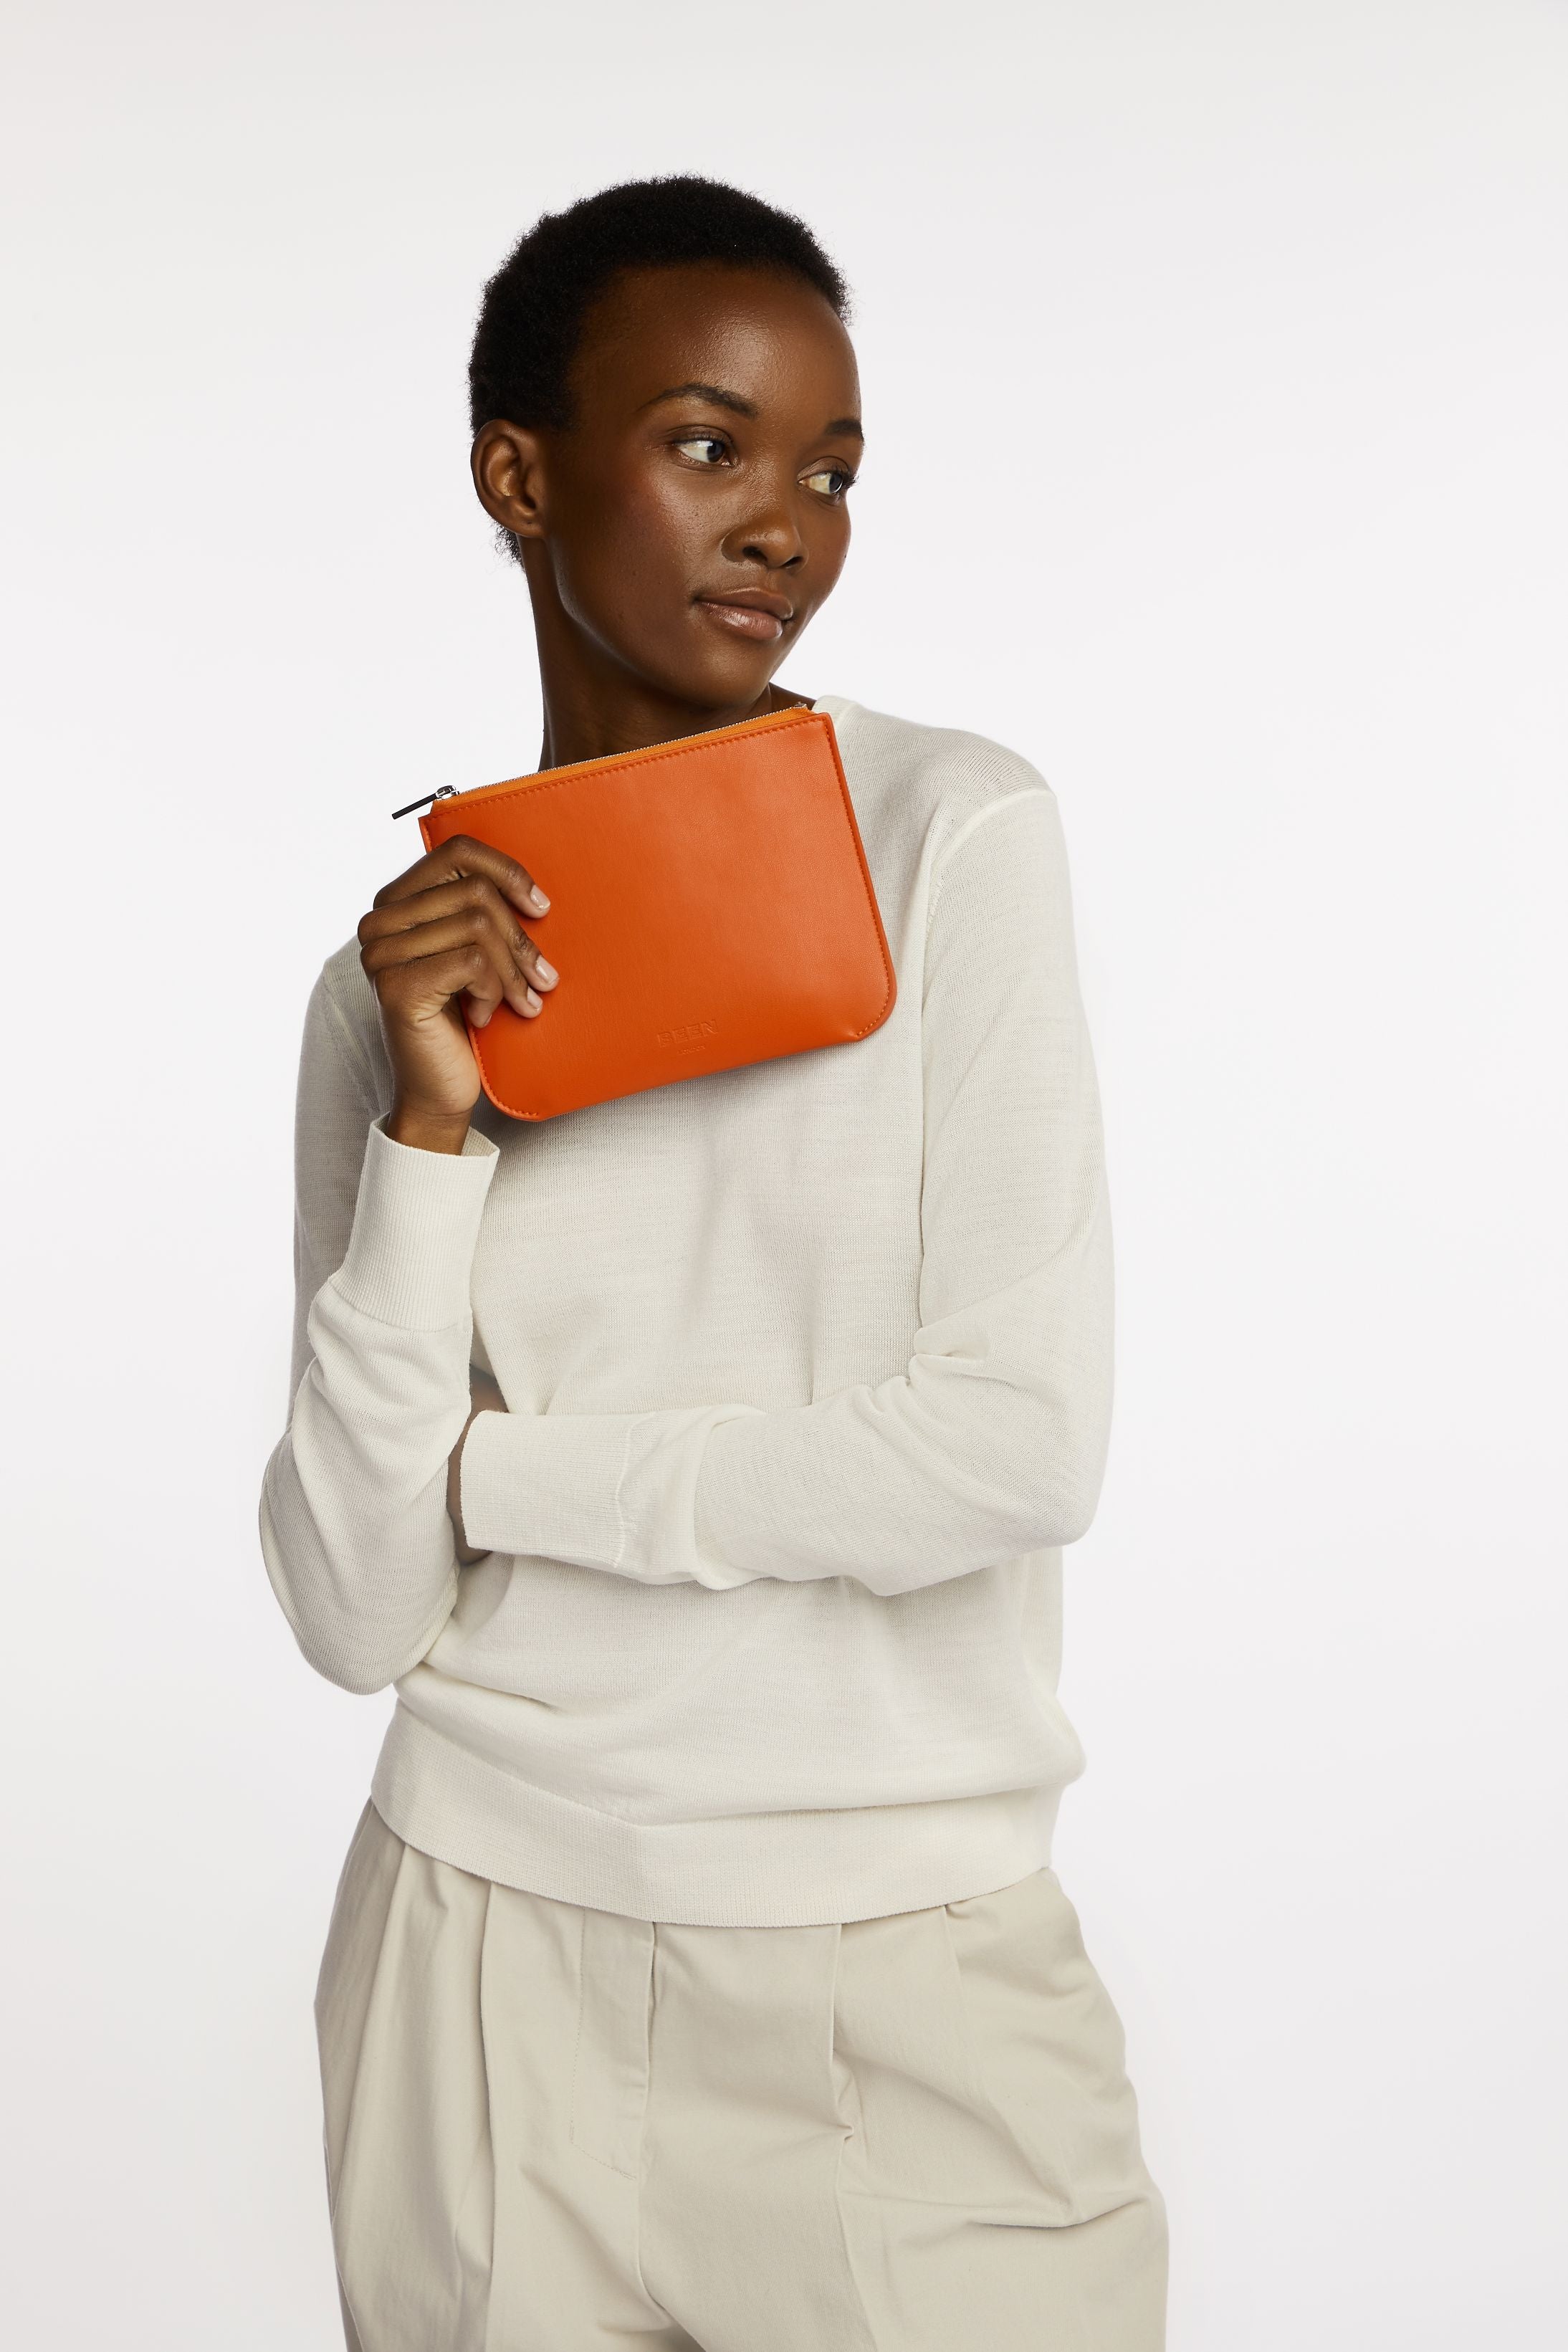 Daley Small Pouch in Blood Orange held by model